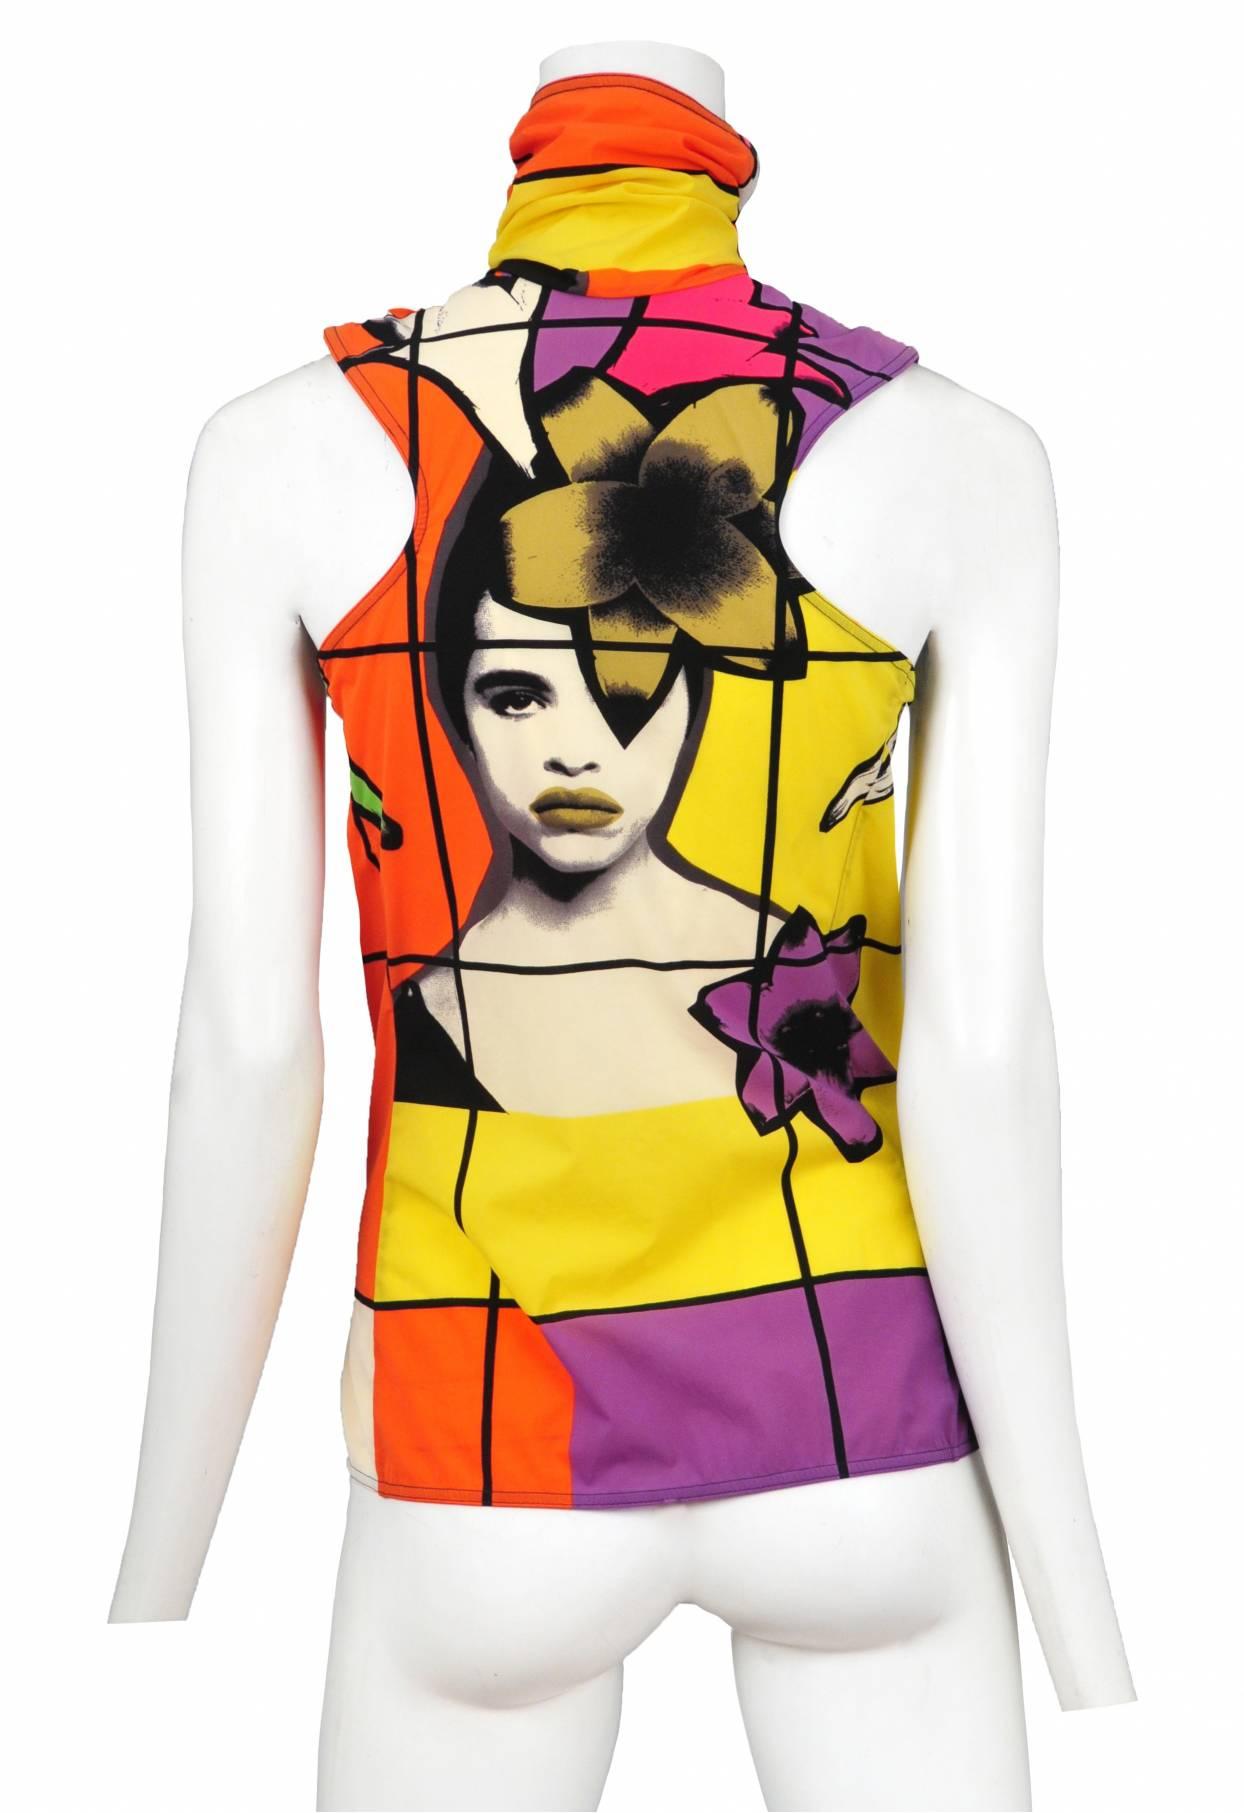 Vintage Thierry Mugler snap front turtle neck tank top featuring a printed neon grid and image of a model's face on the front and back.